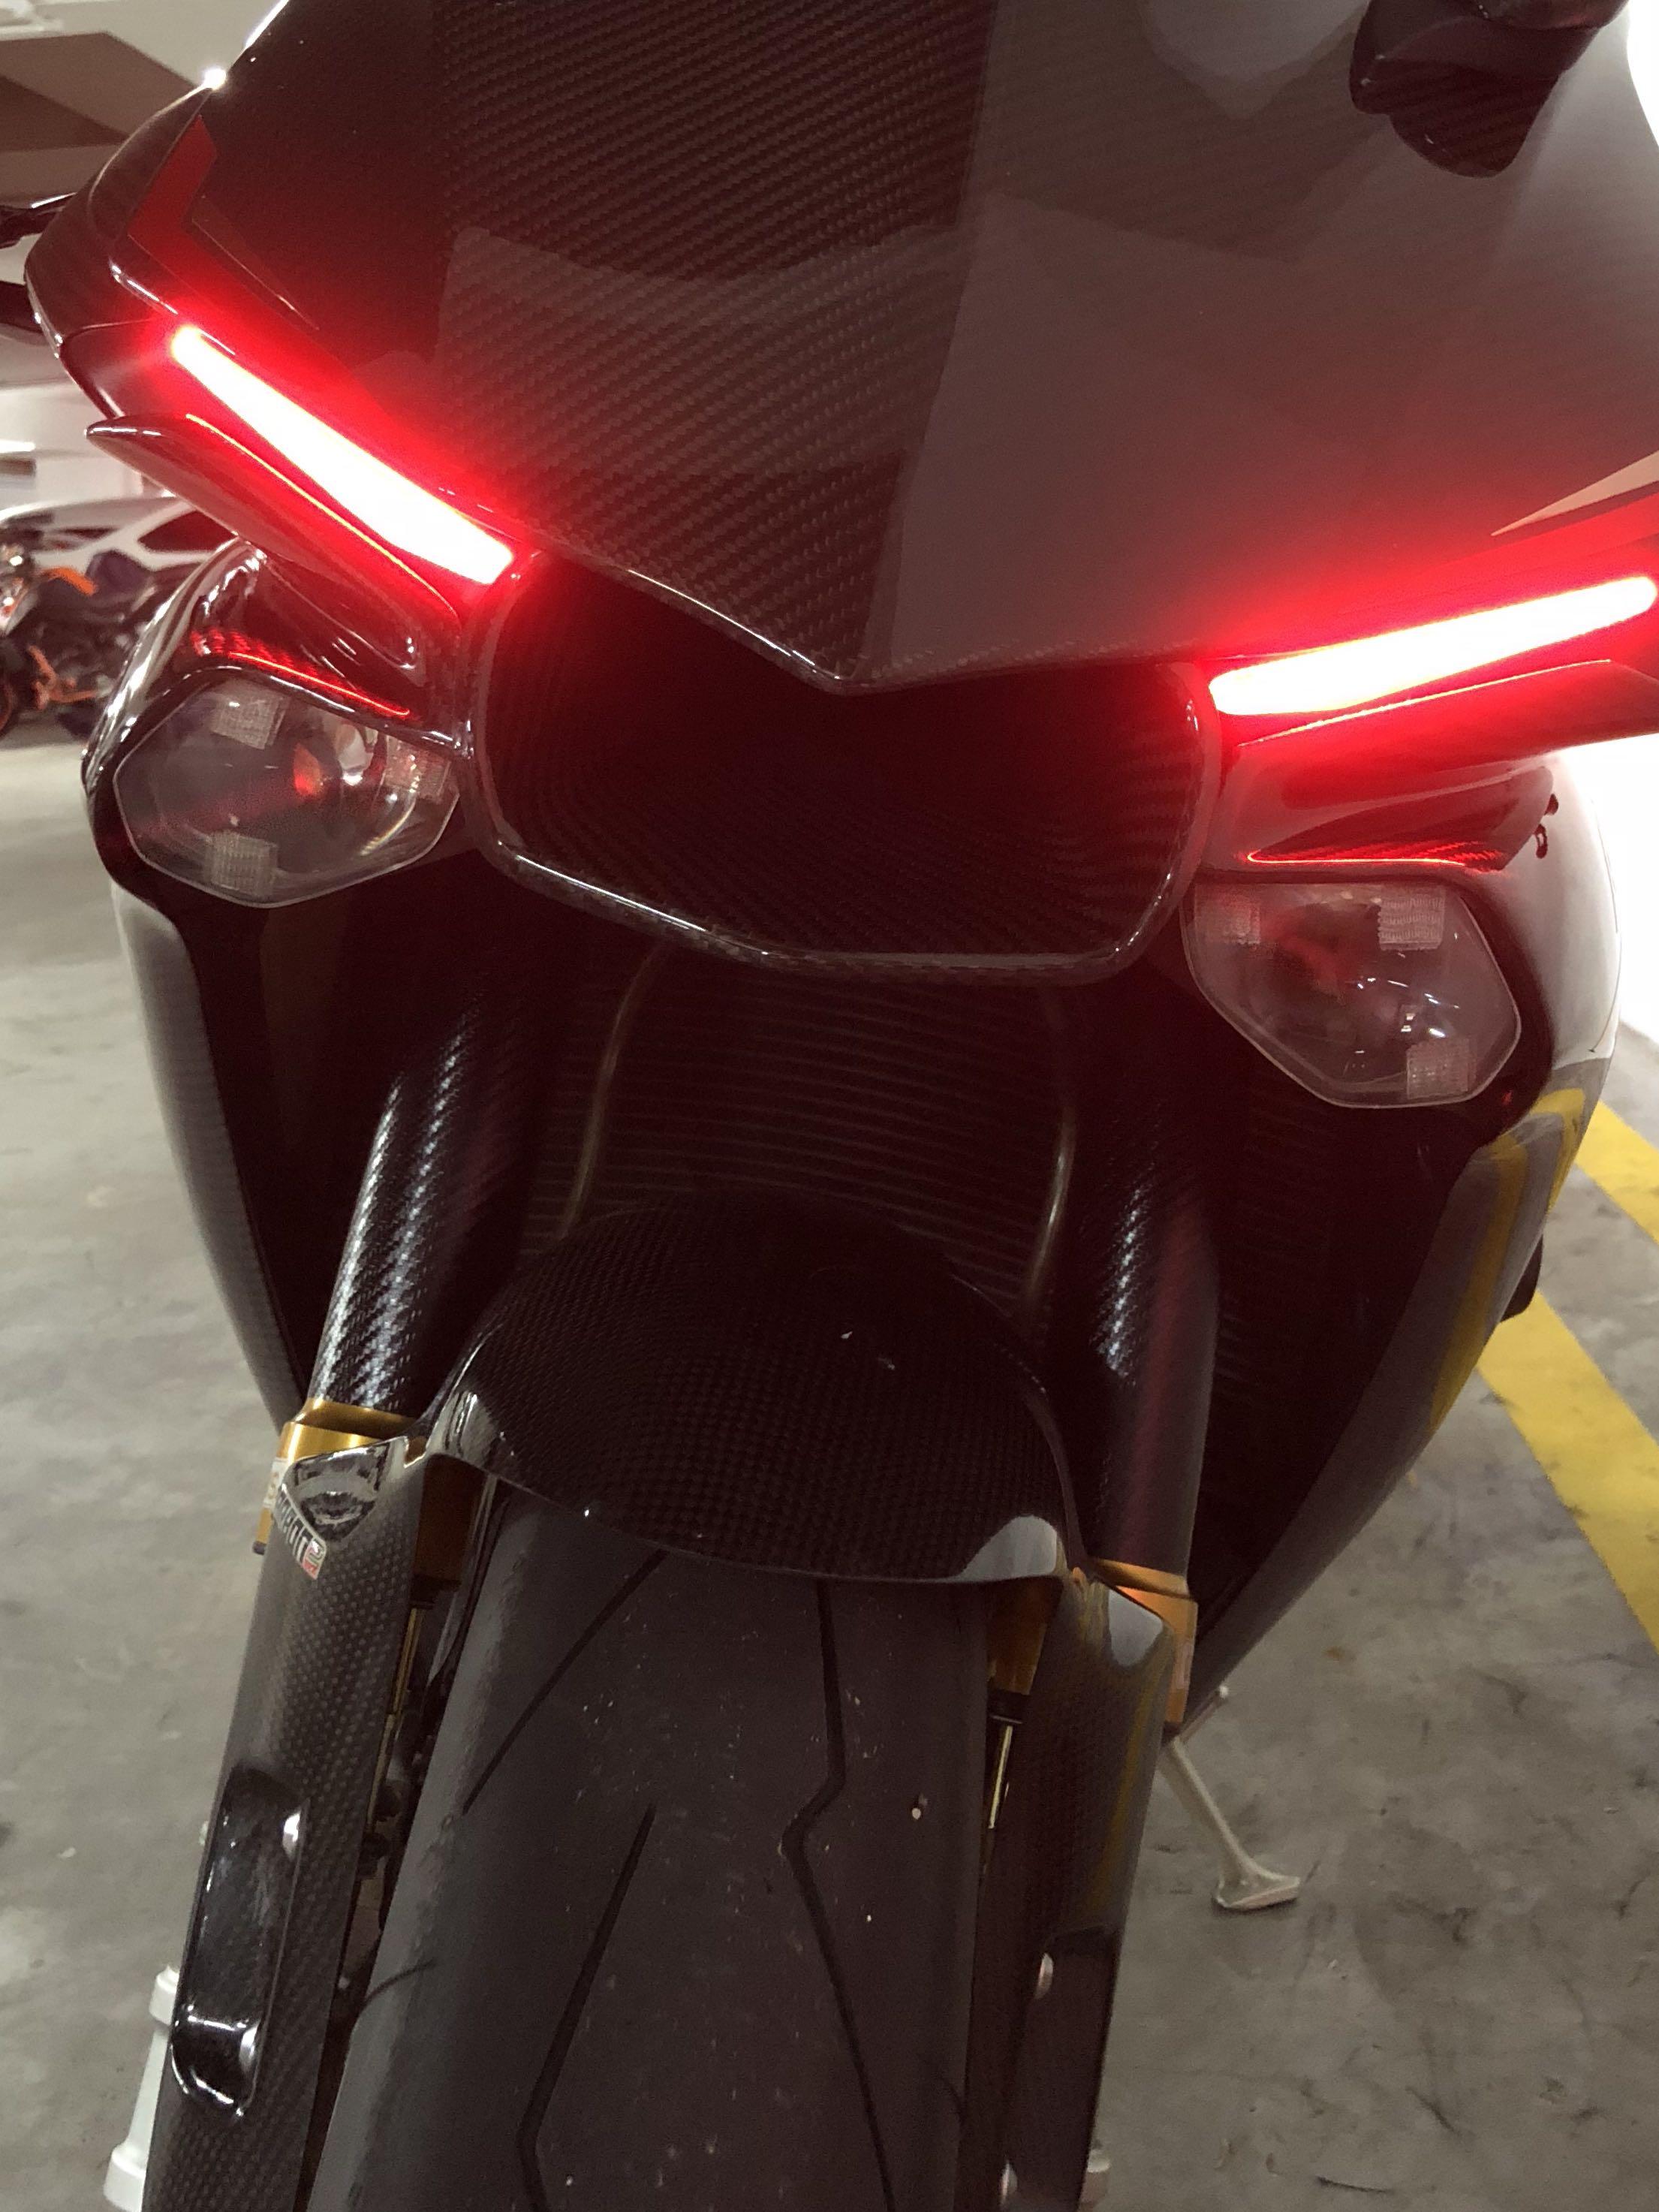 Yamaha R1 Mutli colored DRL by Intelligent System, Motorcycles, Motorcycle Accessories on